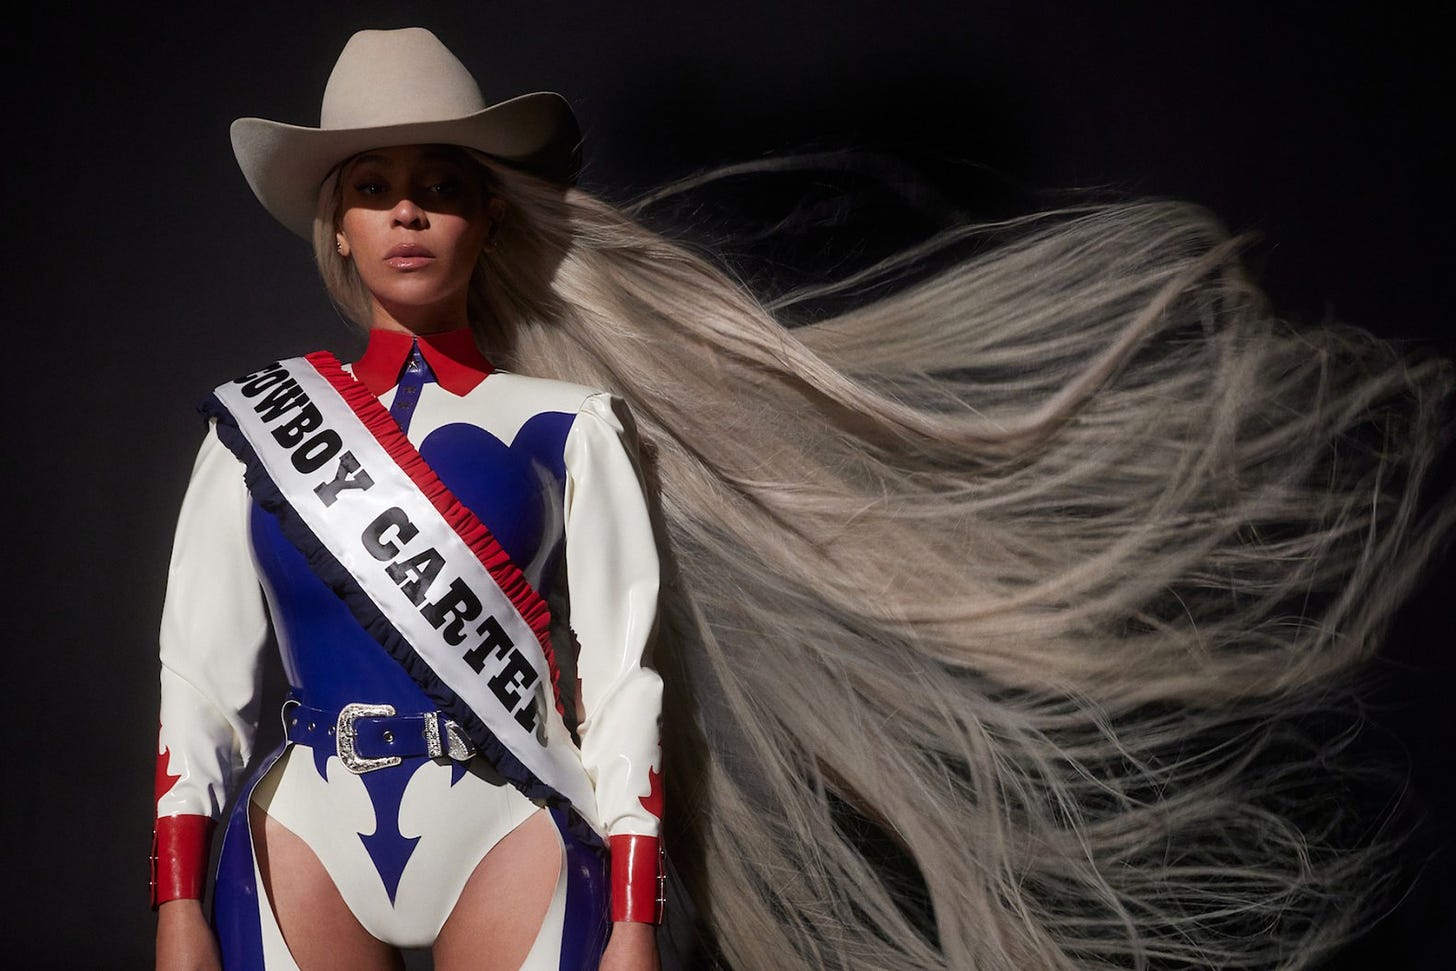 Beyonce Reinvents American Music In Her Own Image on 'Cowboy Carter'